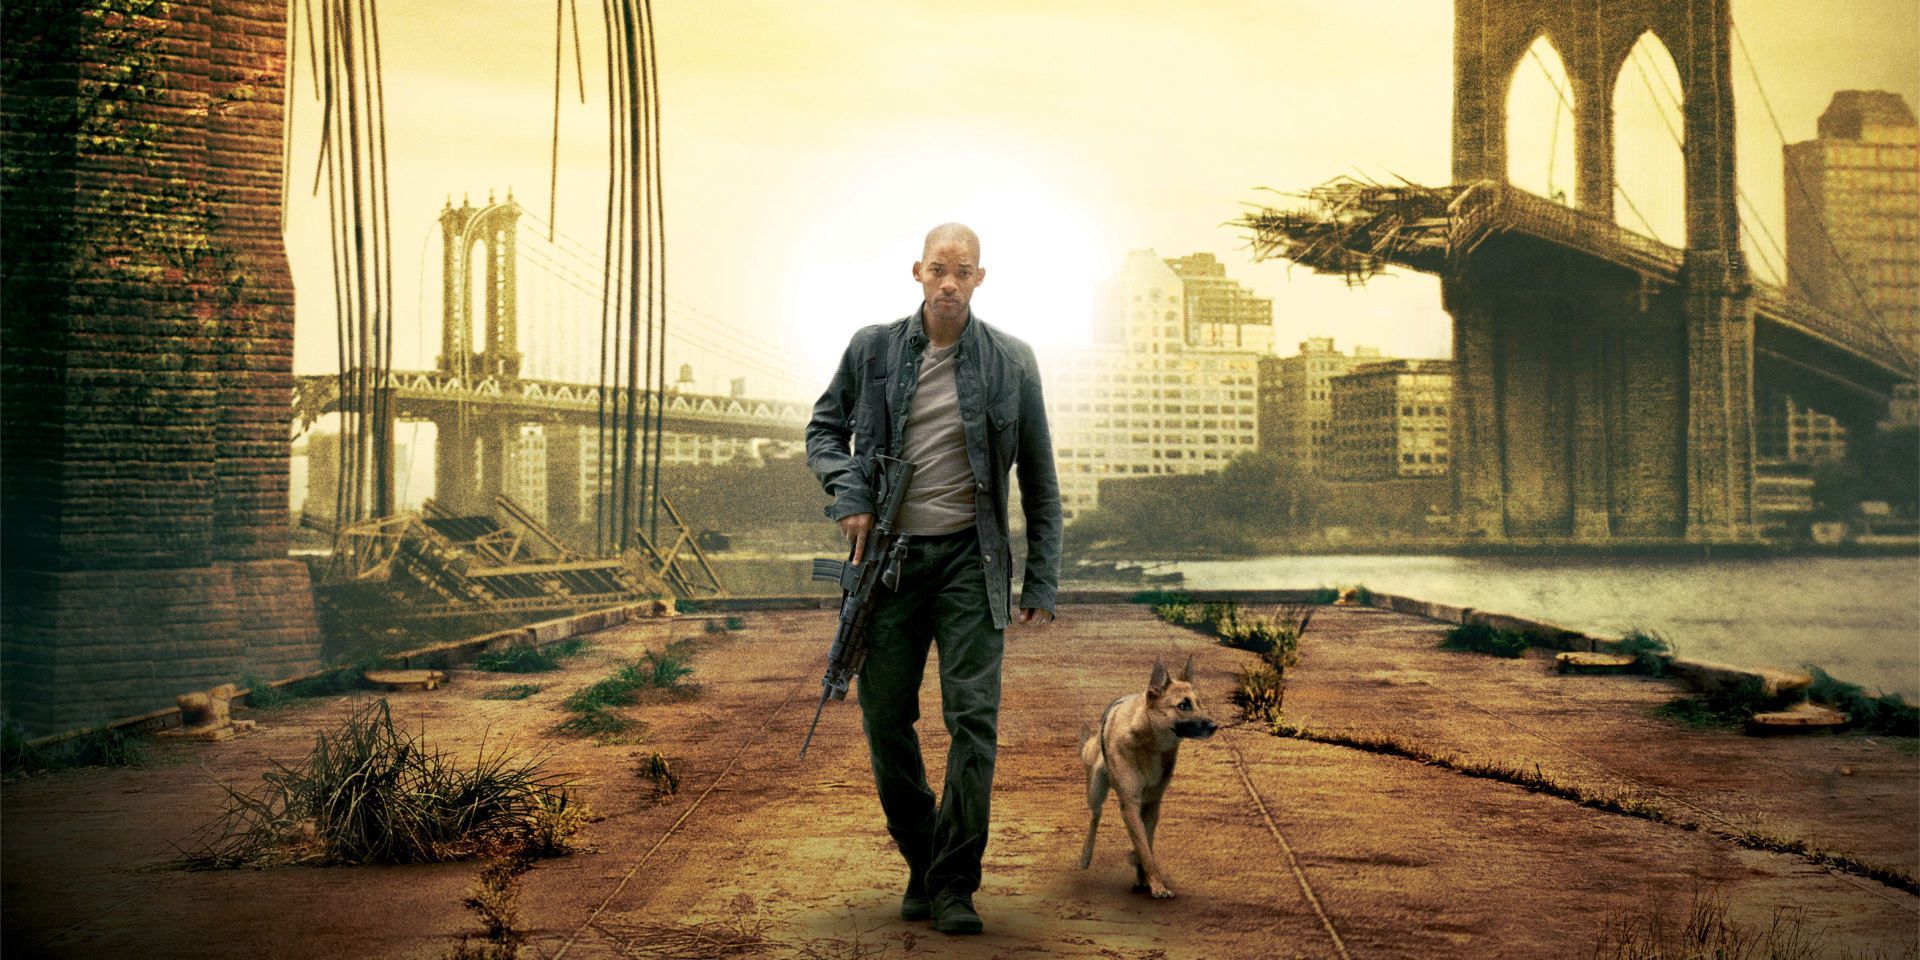 Robert with Sam the dog in I Am Legend